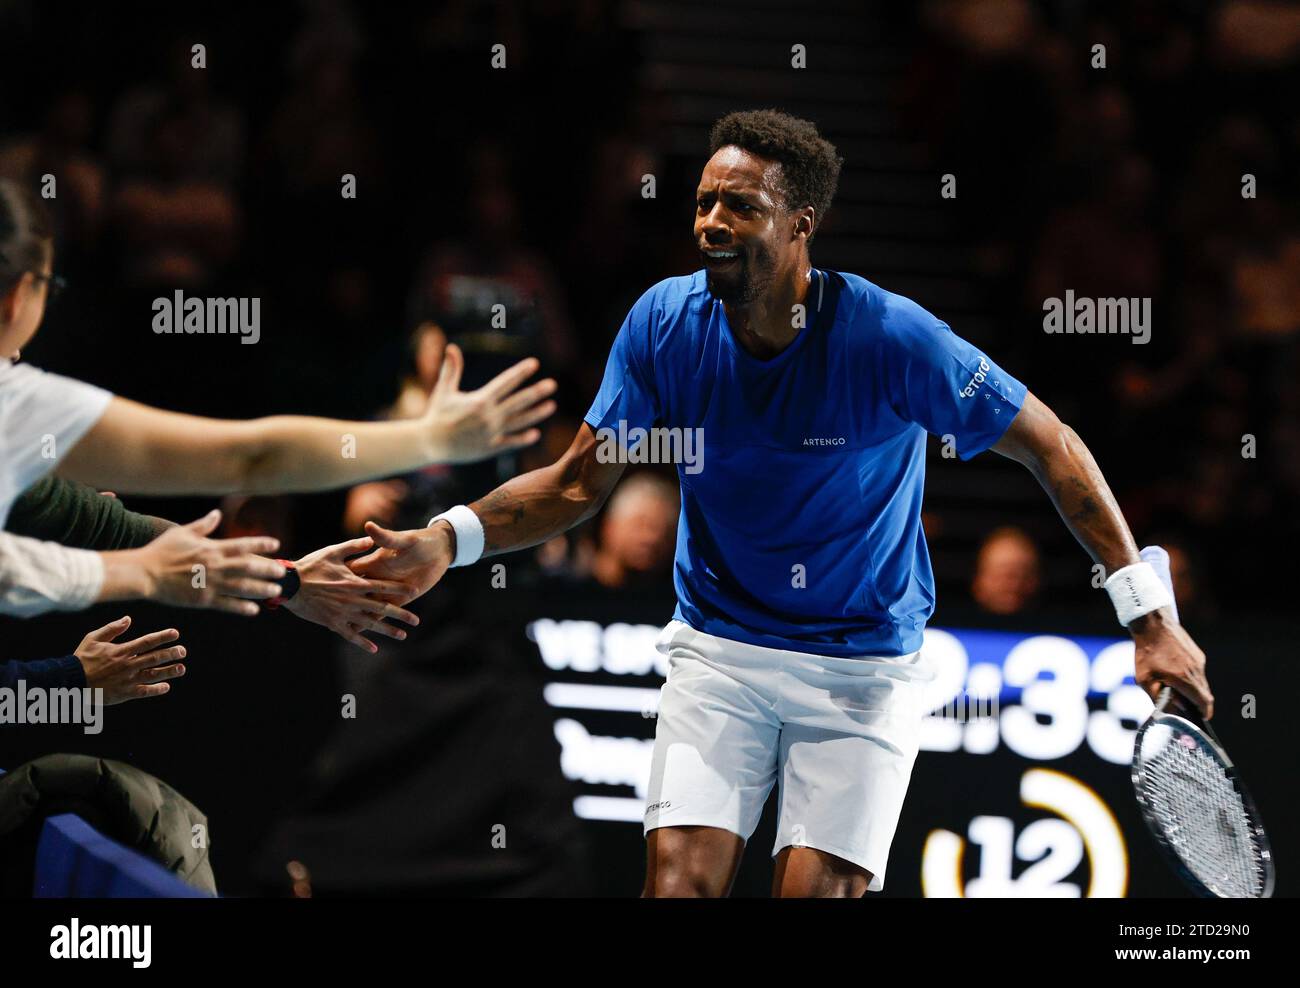 15th December 2023; ExCel Centre, Newham, London, England; Ultimate Tennis Showdown Grand Final Day 1; Gael Monfils (La Monf) interactives with fans during the match against Alexander Bublik (The Bublik Enemy) Stock Photo